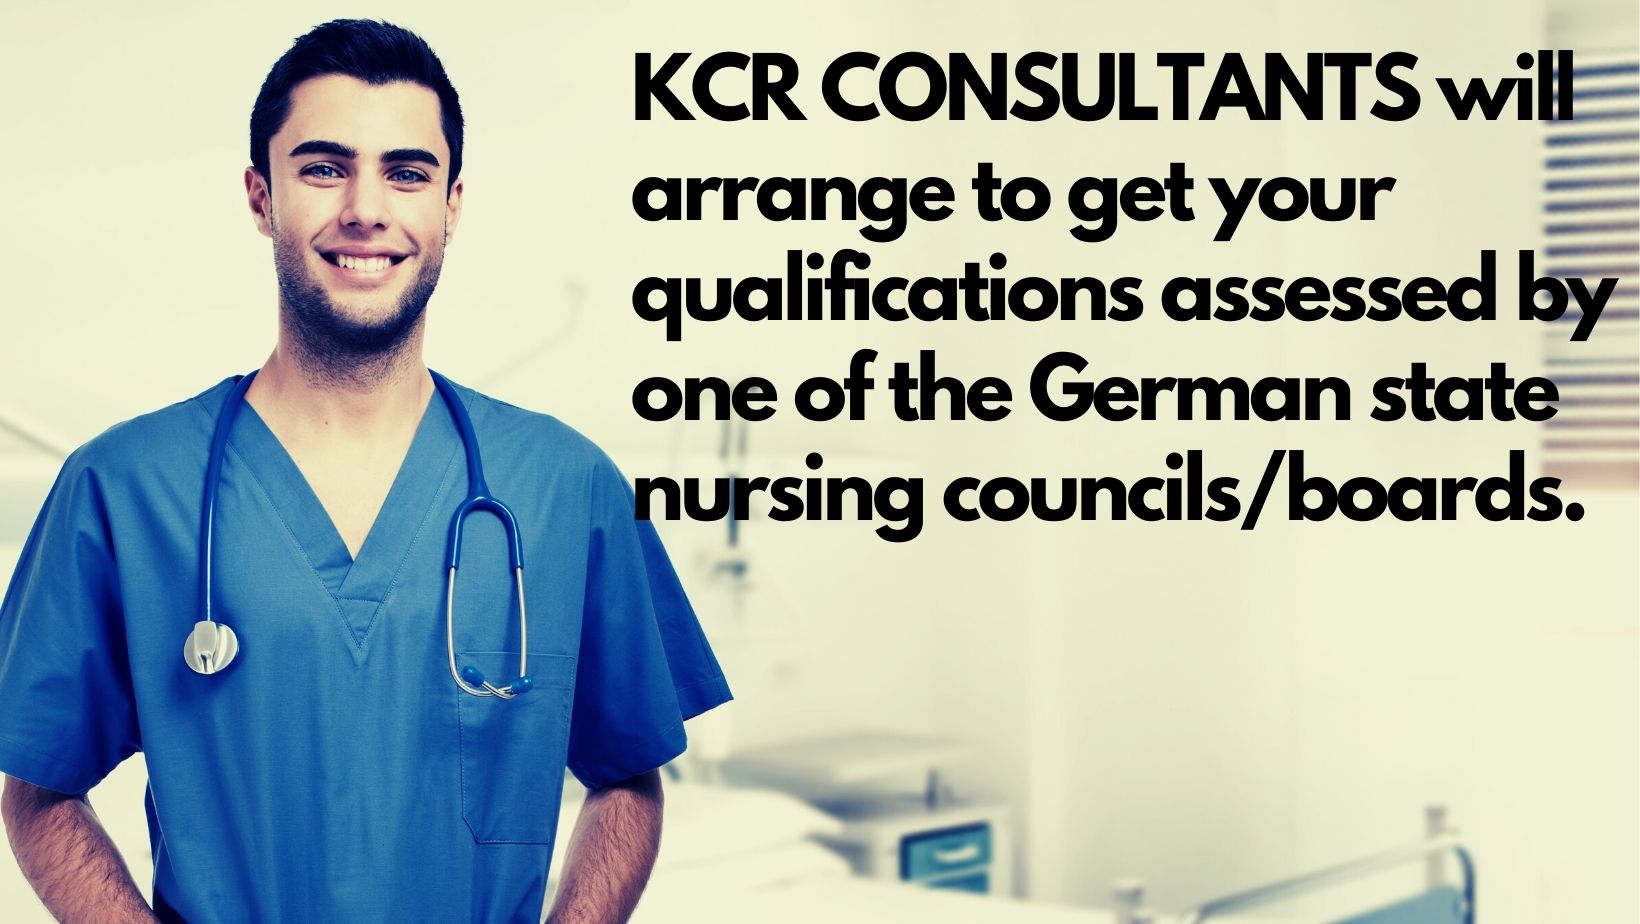 KCR CONSULTANTS will arrange to get your qualifications assessed by one of the German state nursing councils boards.